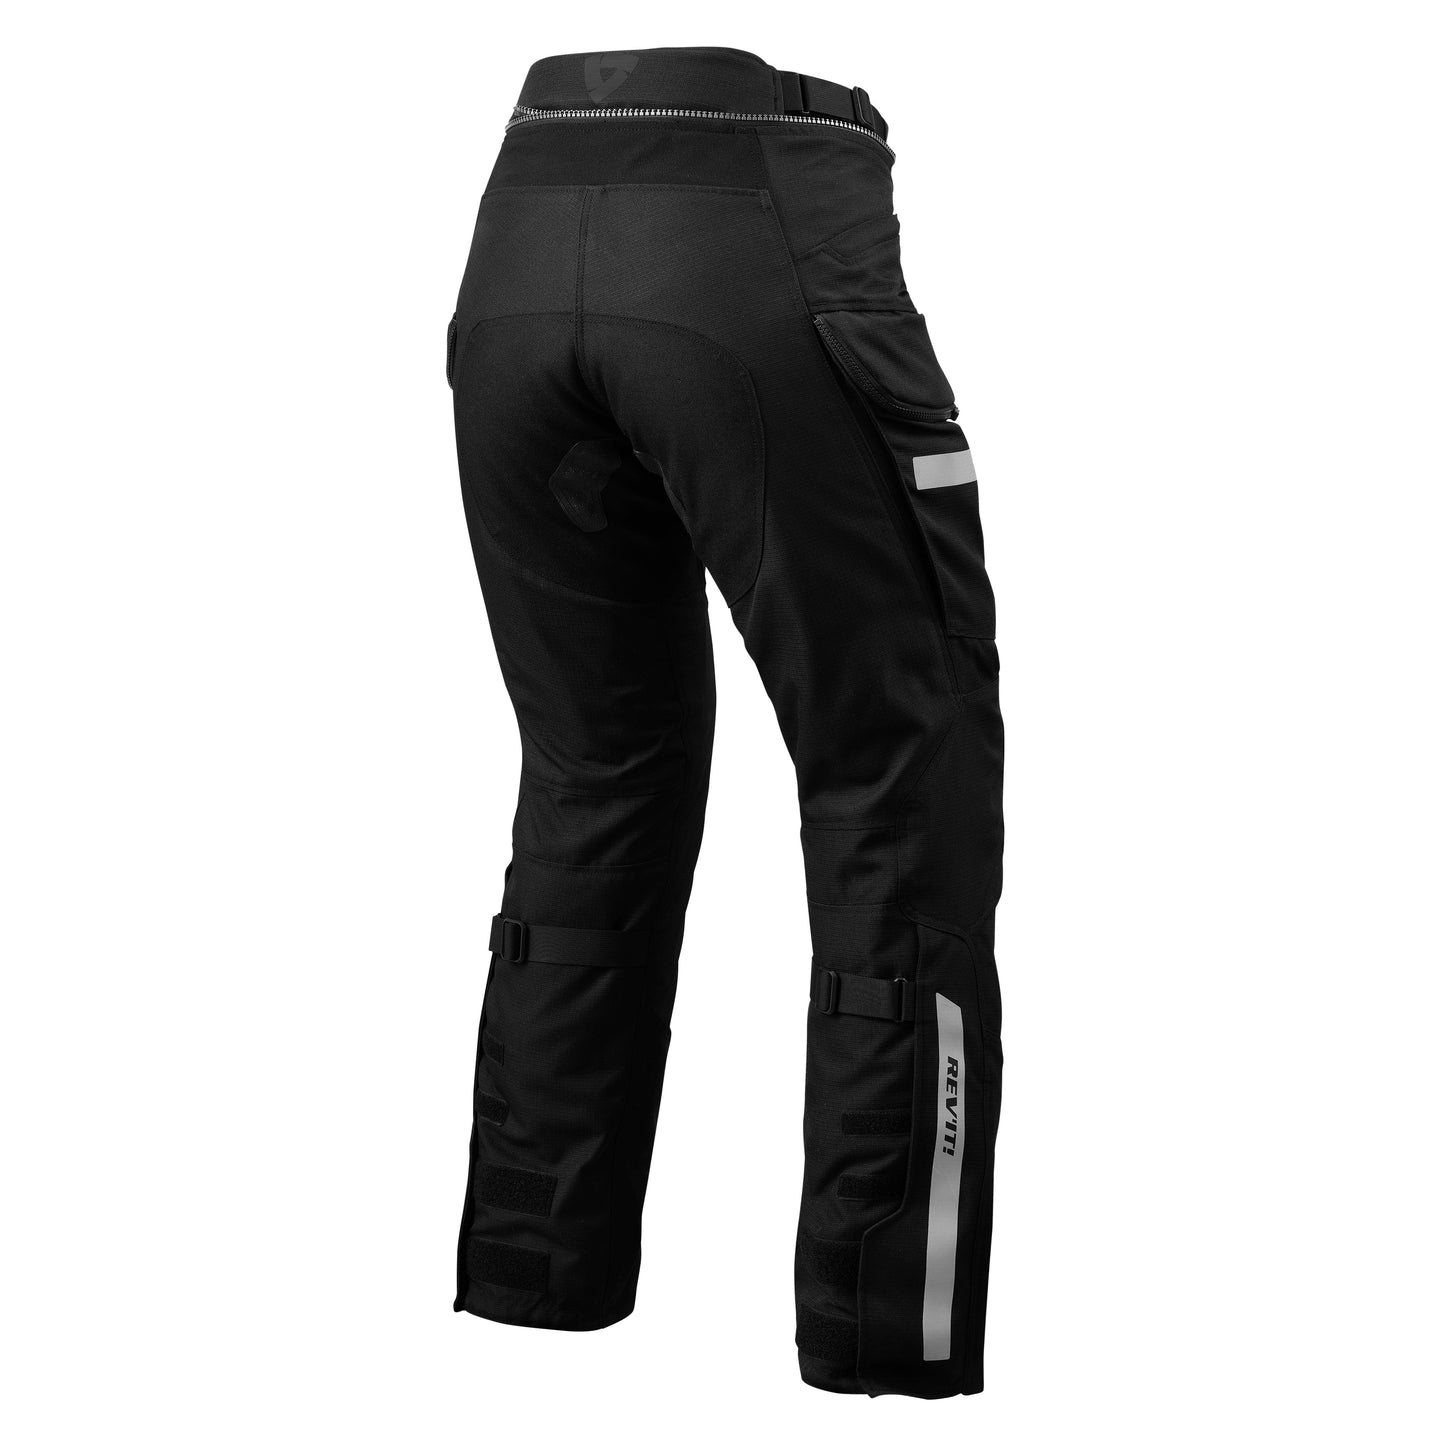 REV'IT! Sand 4 H2O Ladies Trousers